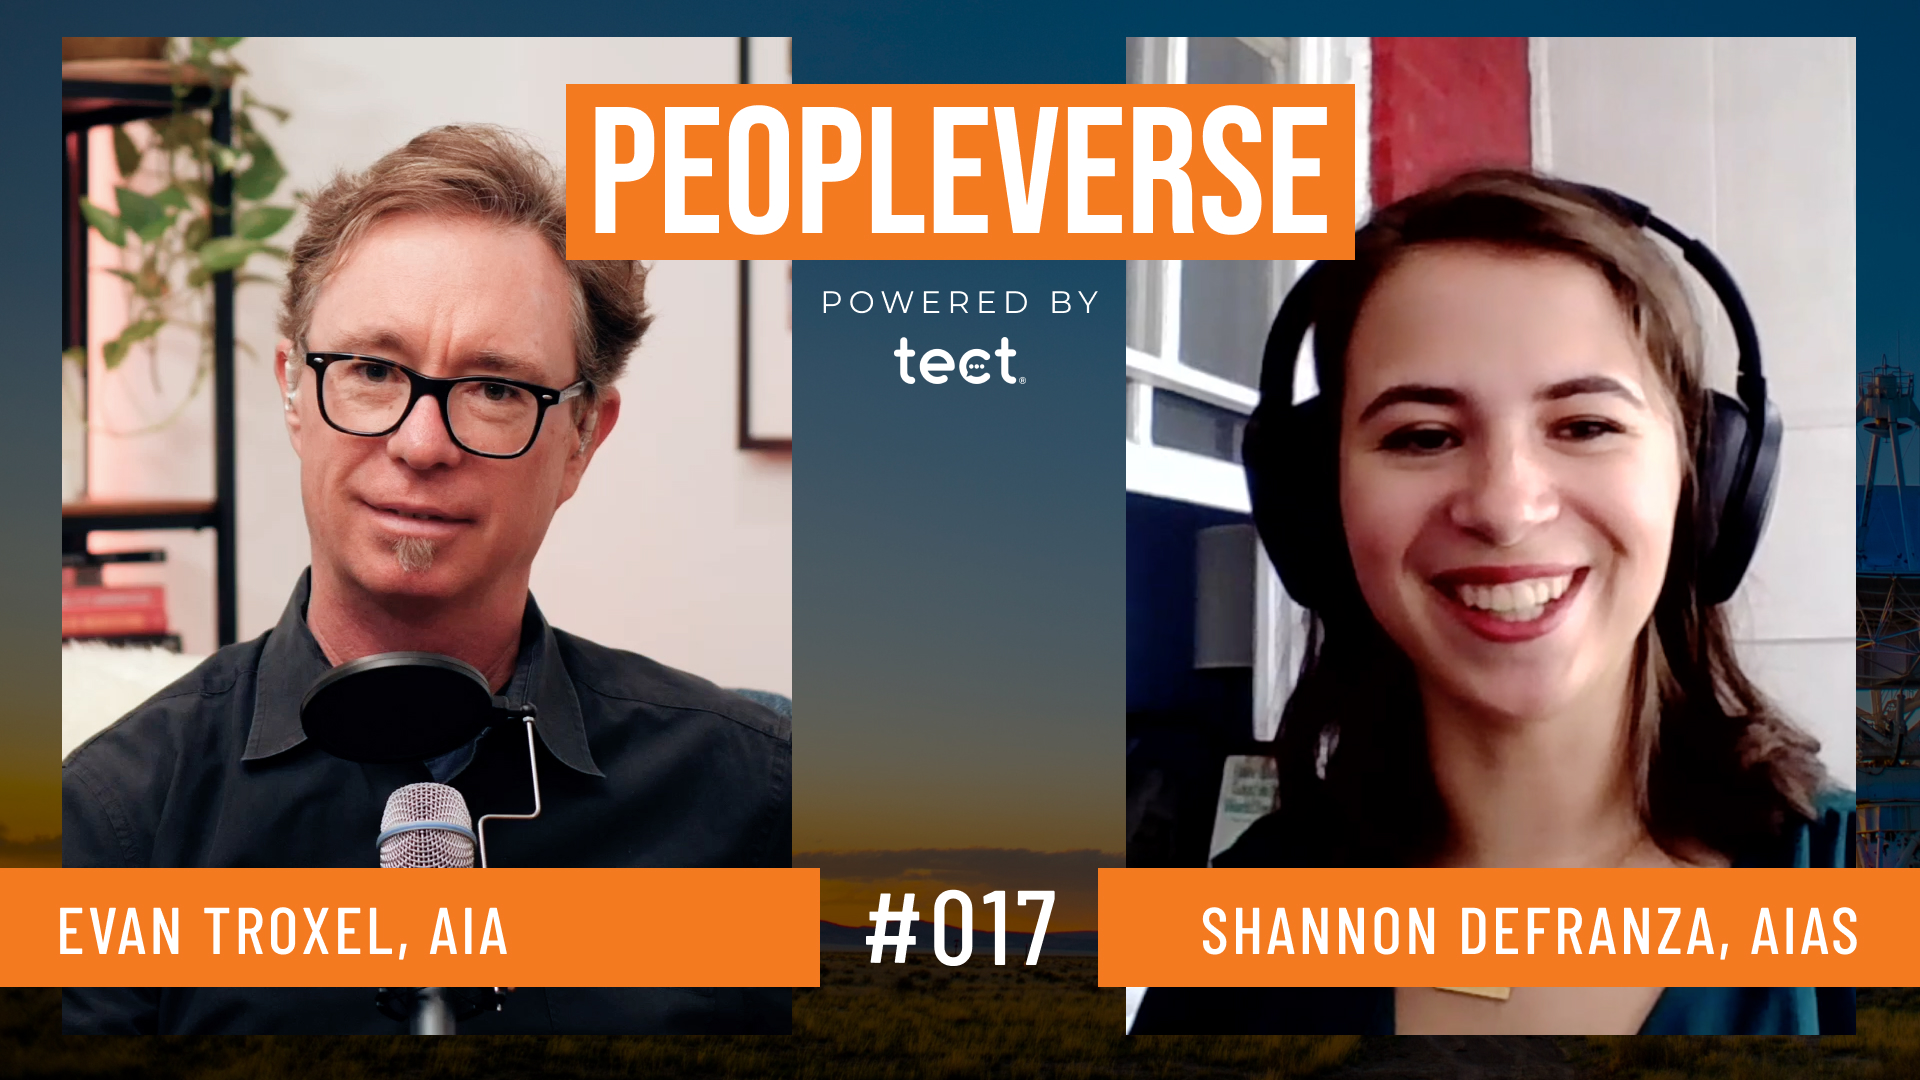 Peopleverse YouTube Thumbnail - Shannon DeFranza